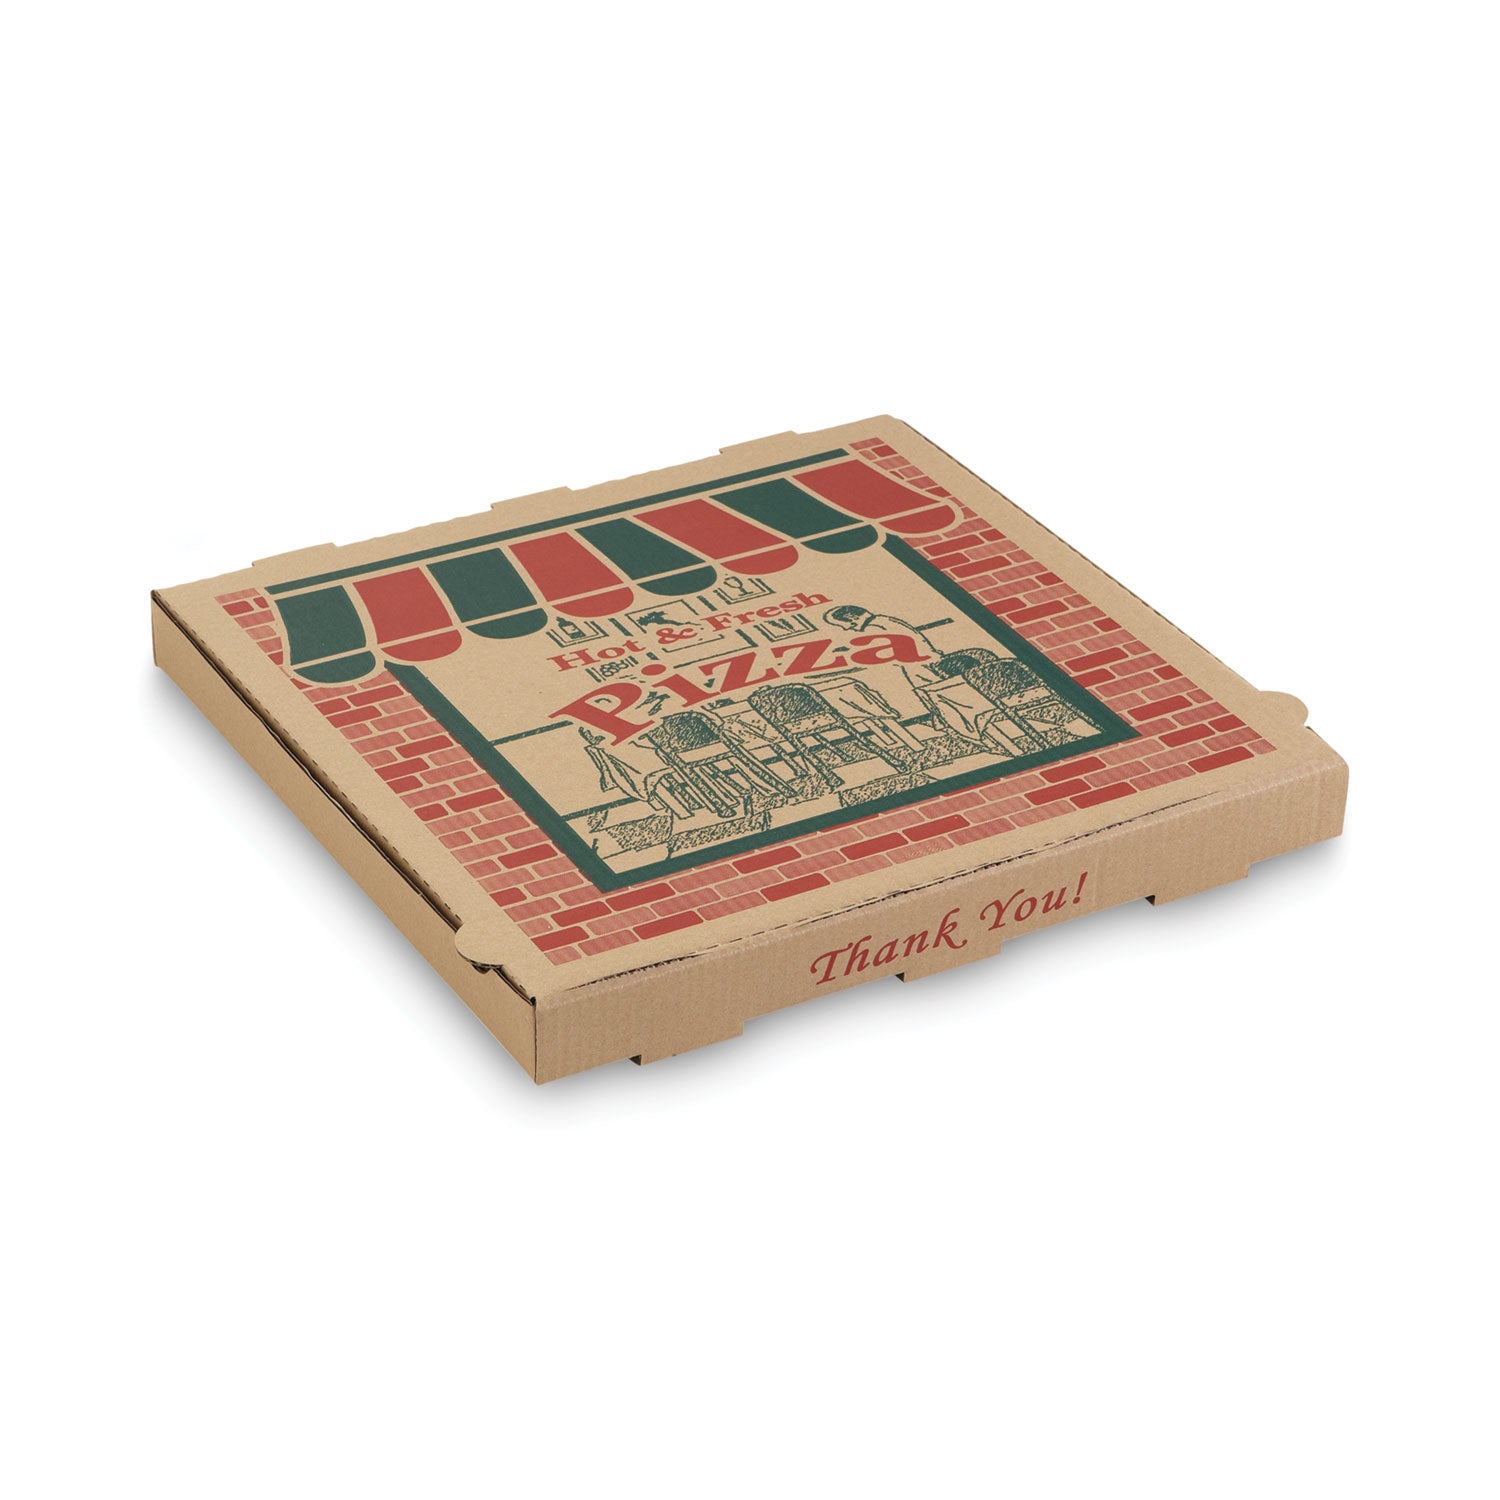 corrugated-pizza-boxes-storefront-14-x-14-x-175-brown-red-green-paper-50-carton_arv7142504 - 3